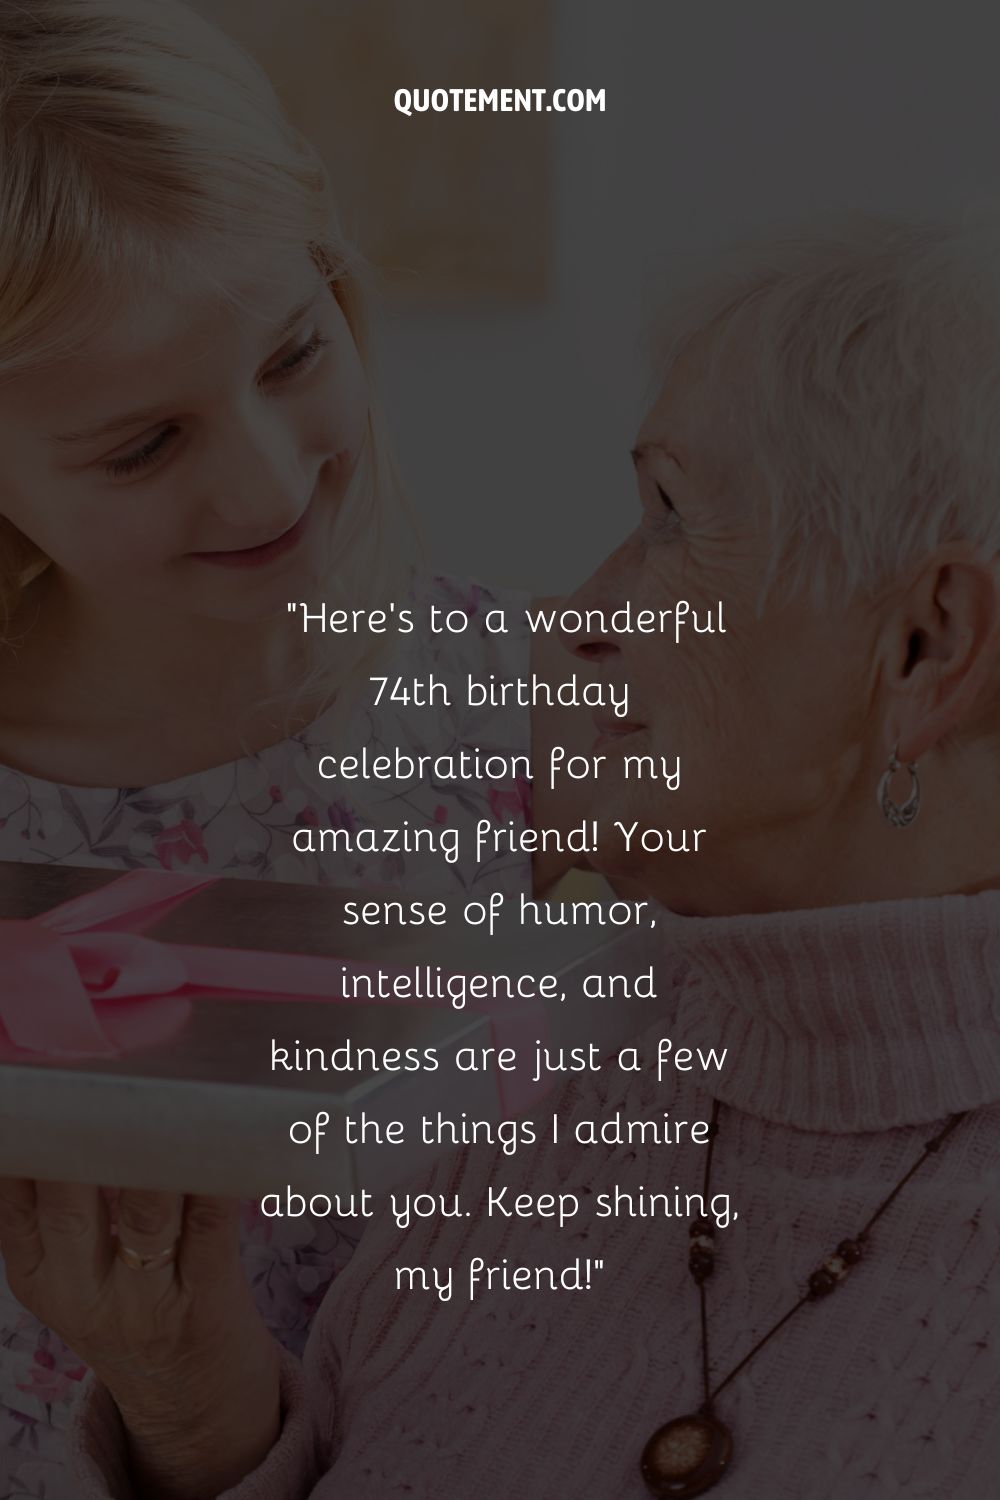 a girl giving a present to an older woman representing a happy 74th birthday wish for a friend